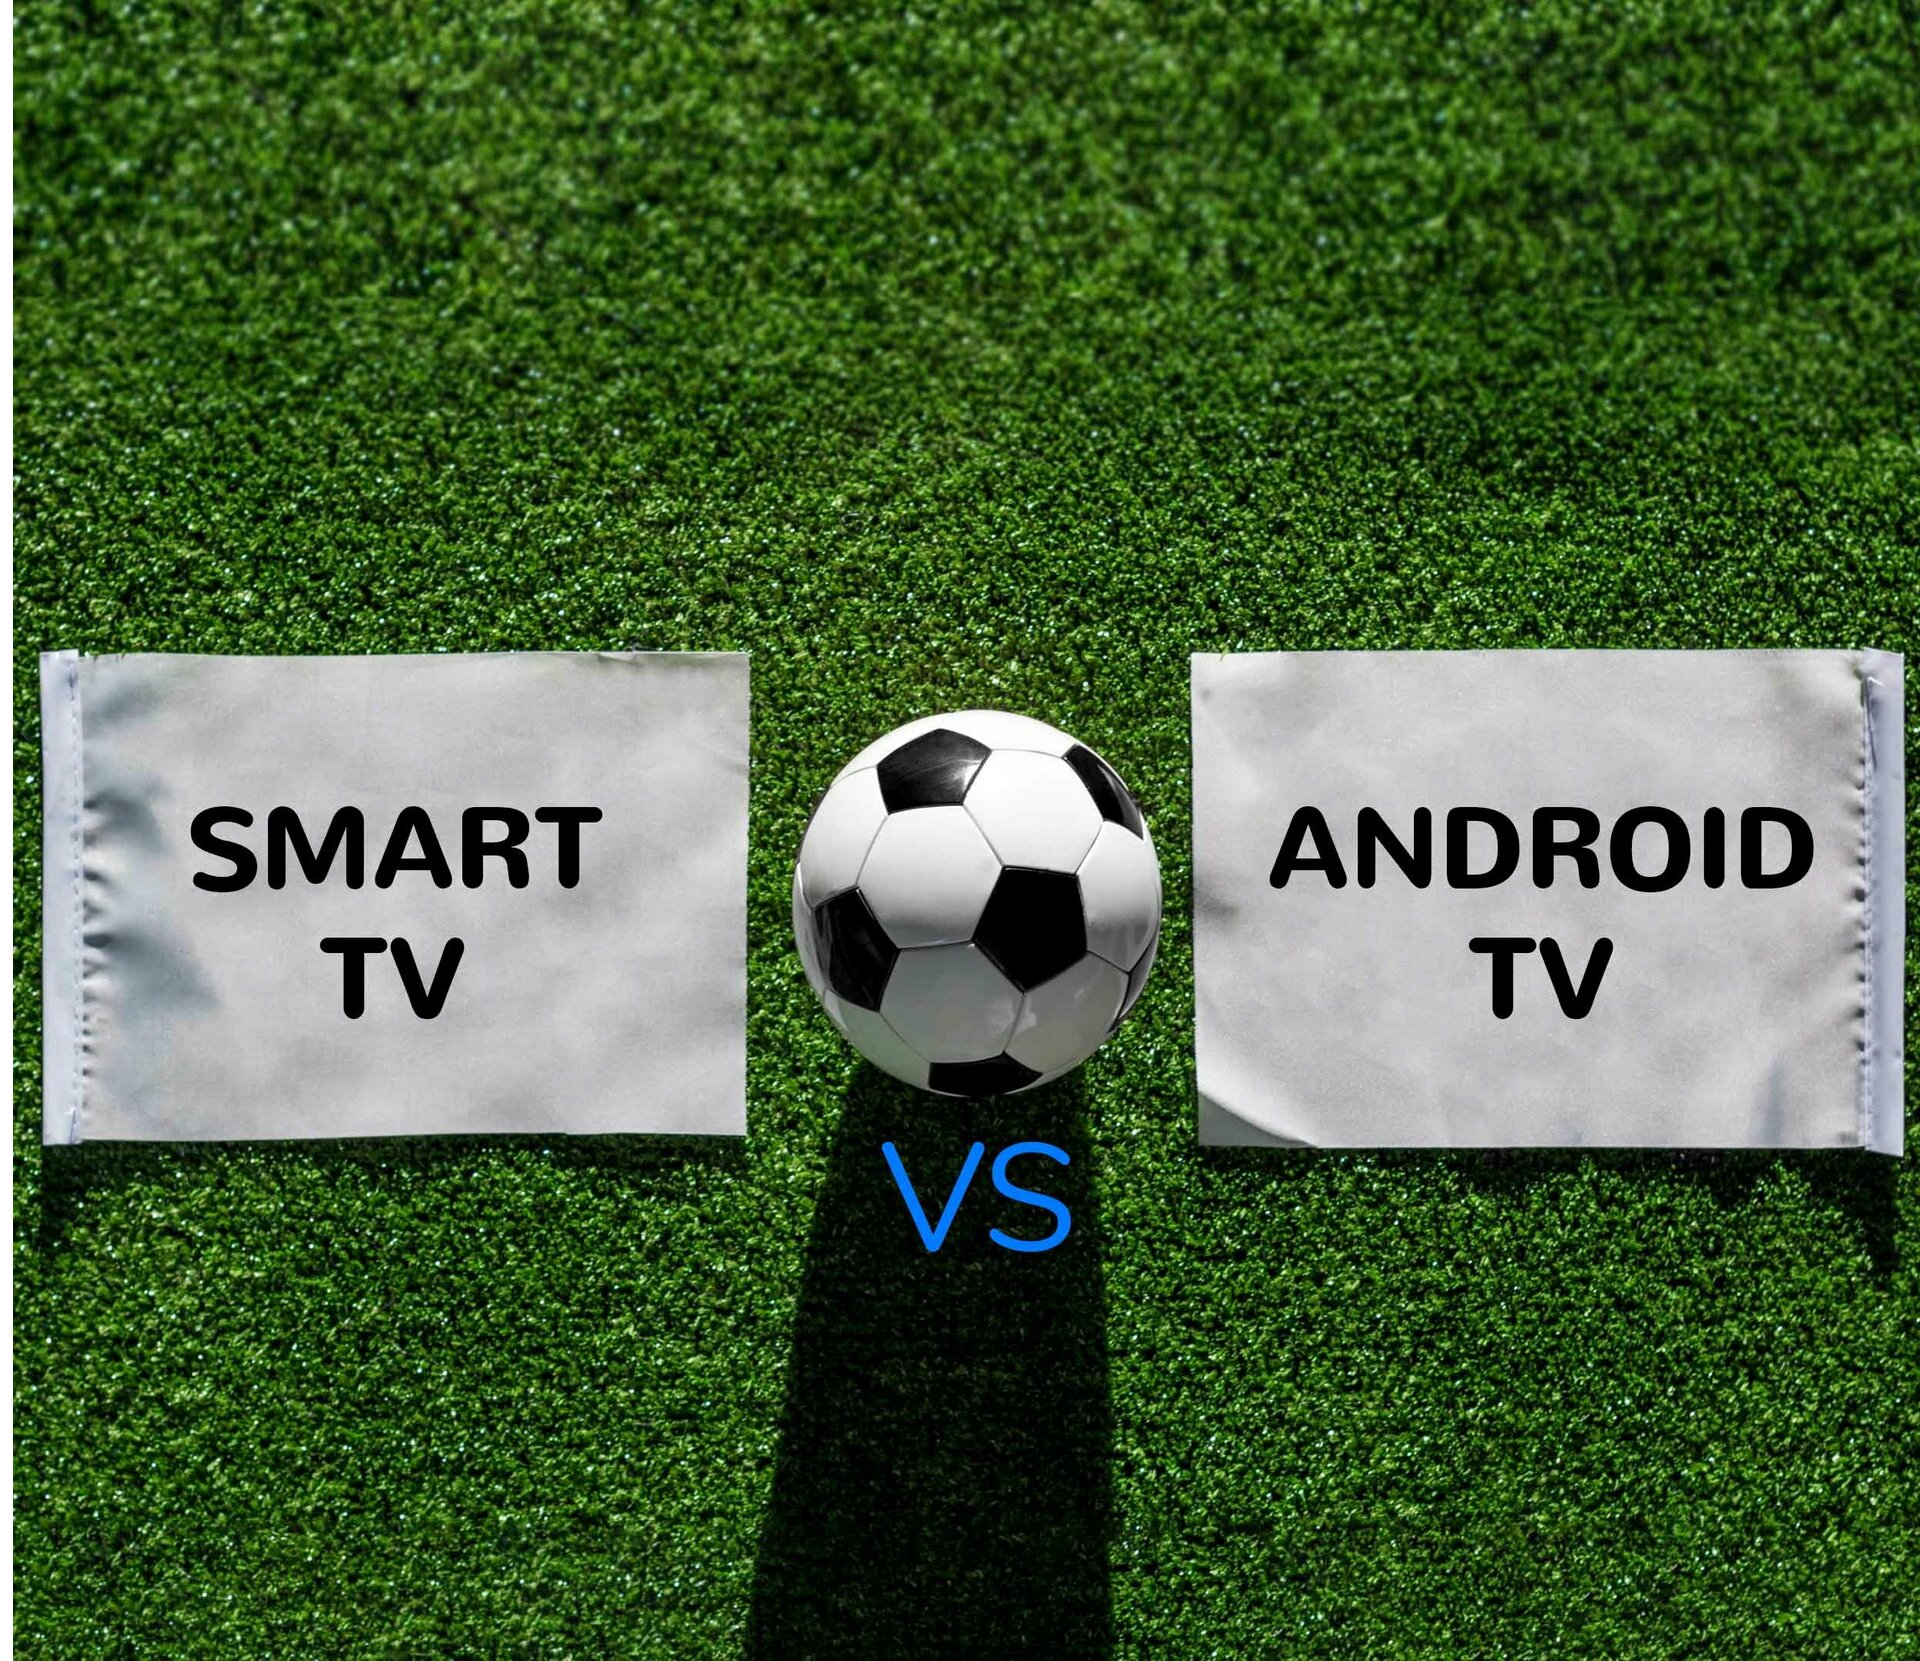 Android TV vs Smart TV